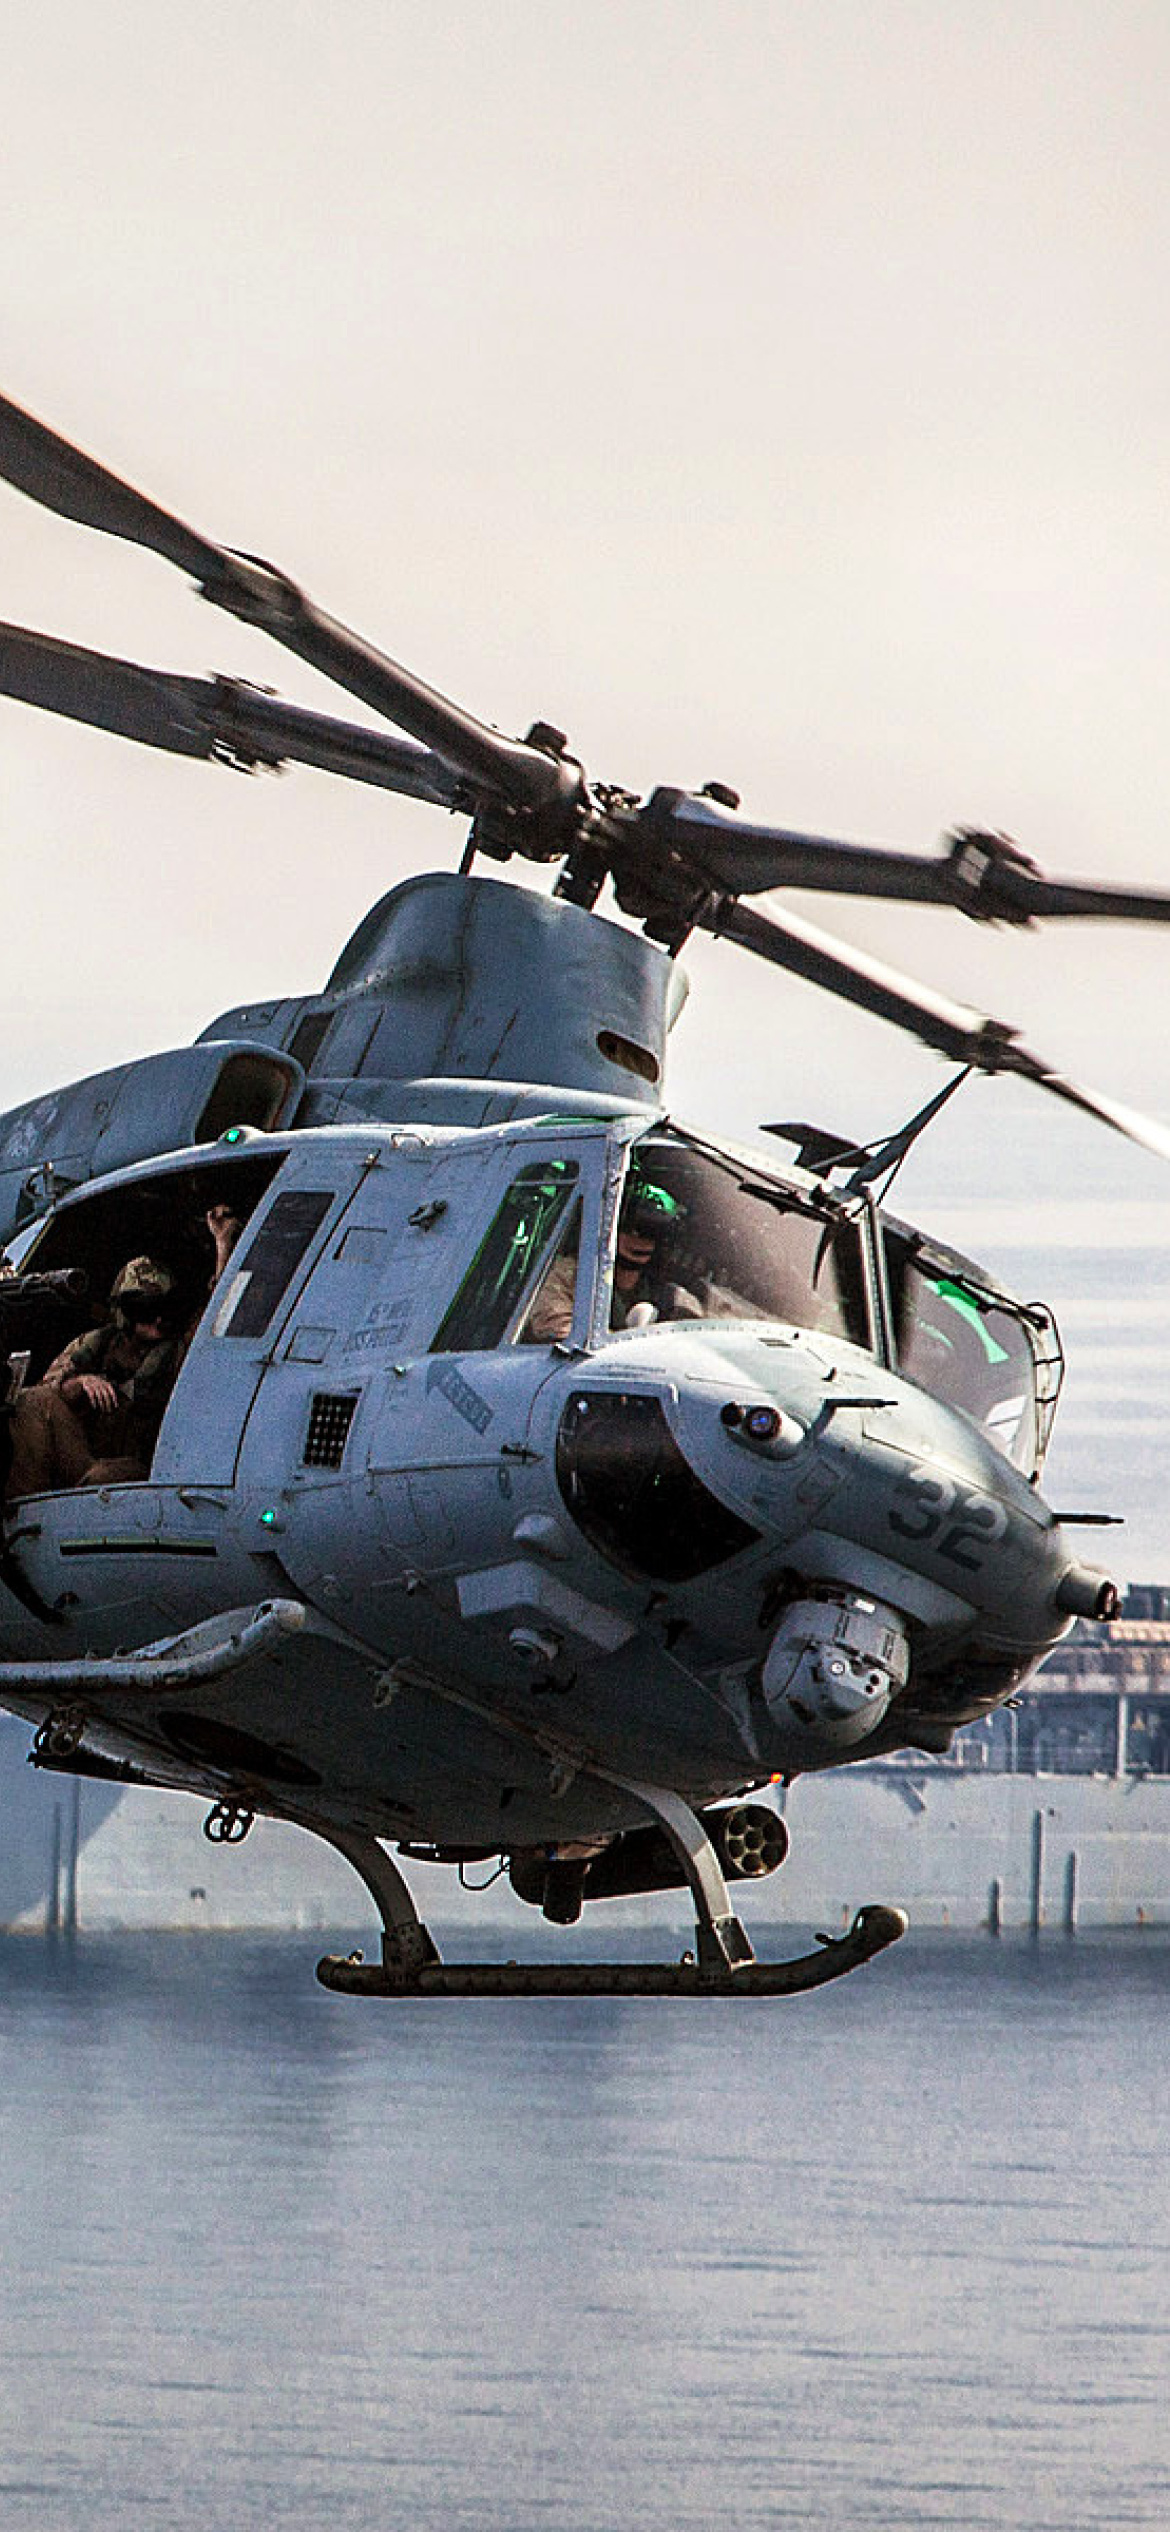 Bell UH 1Y Venom US Helicopter wallpaper 1170x2532